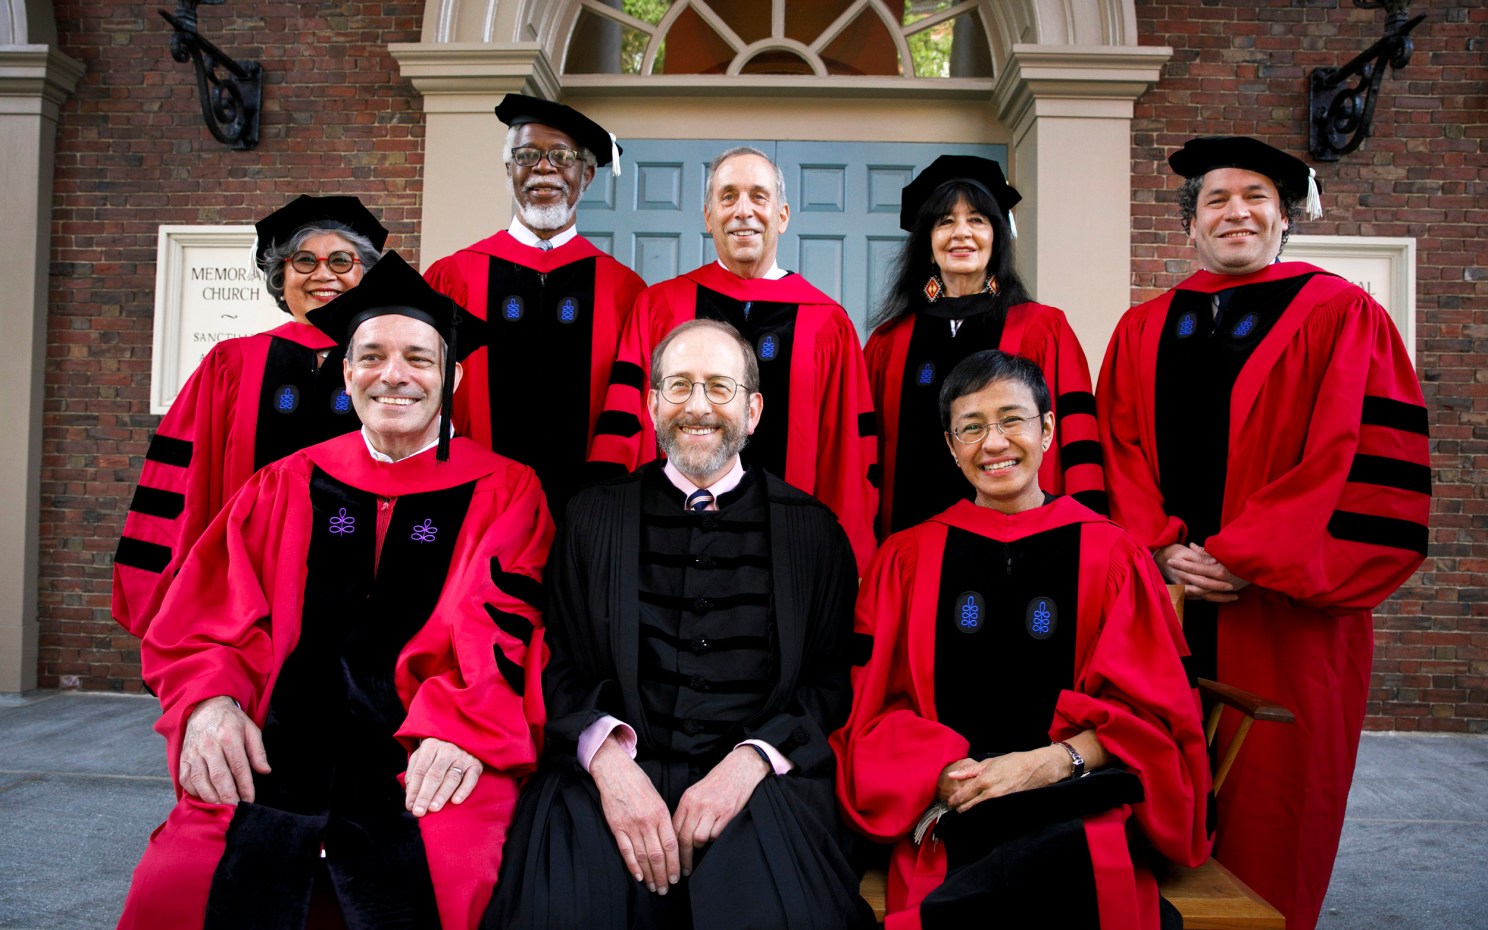 Honorary degree recipients in a formal photo.